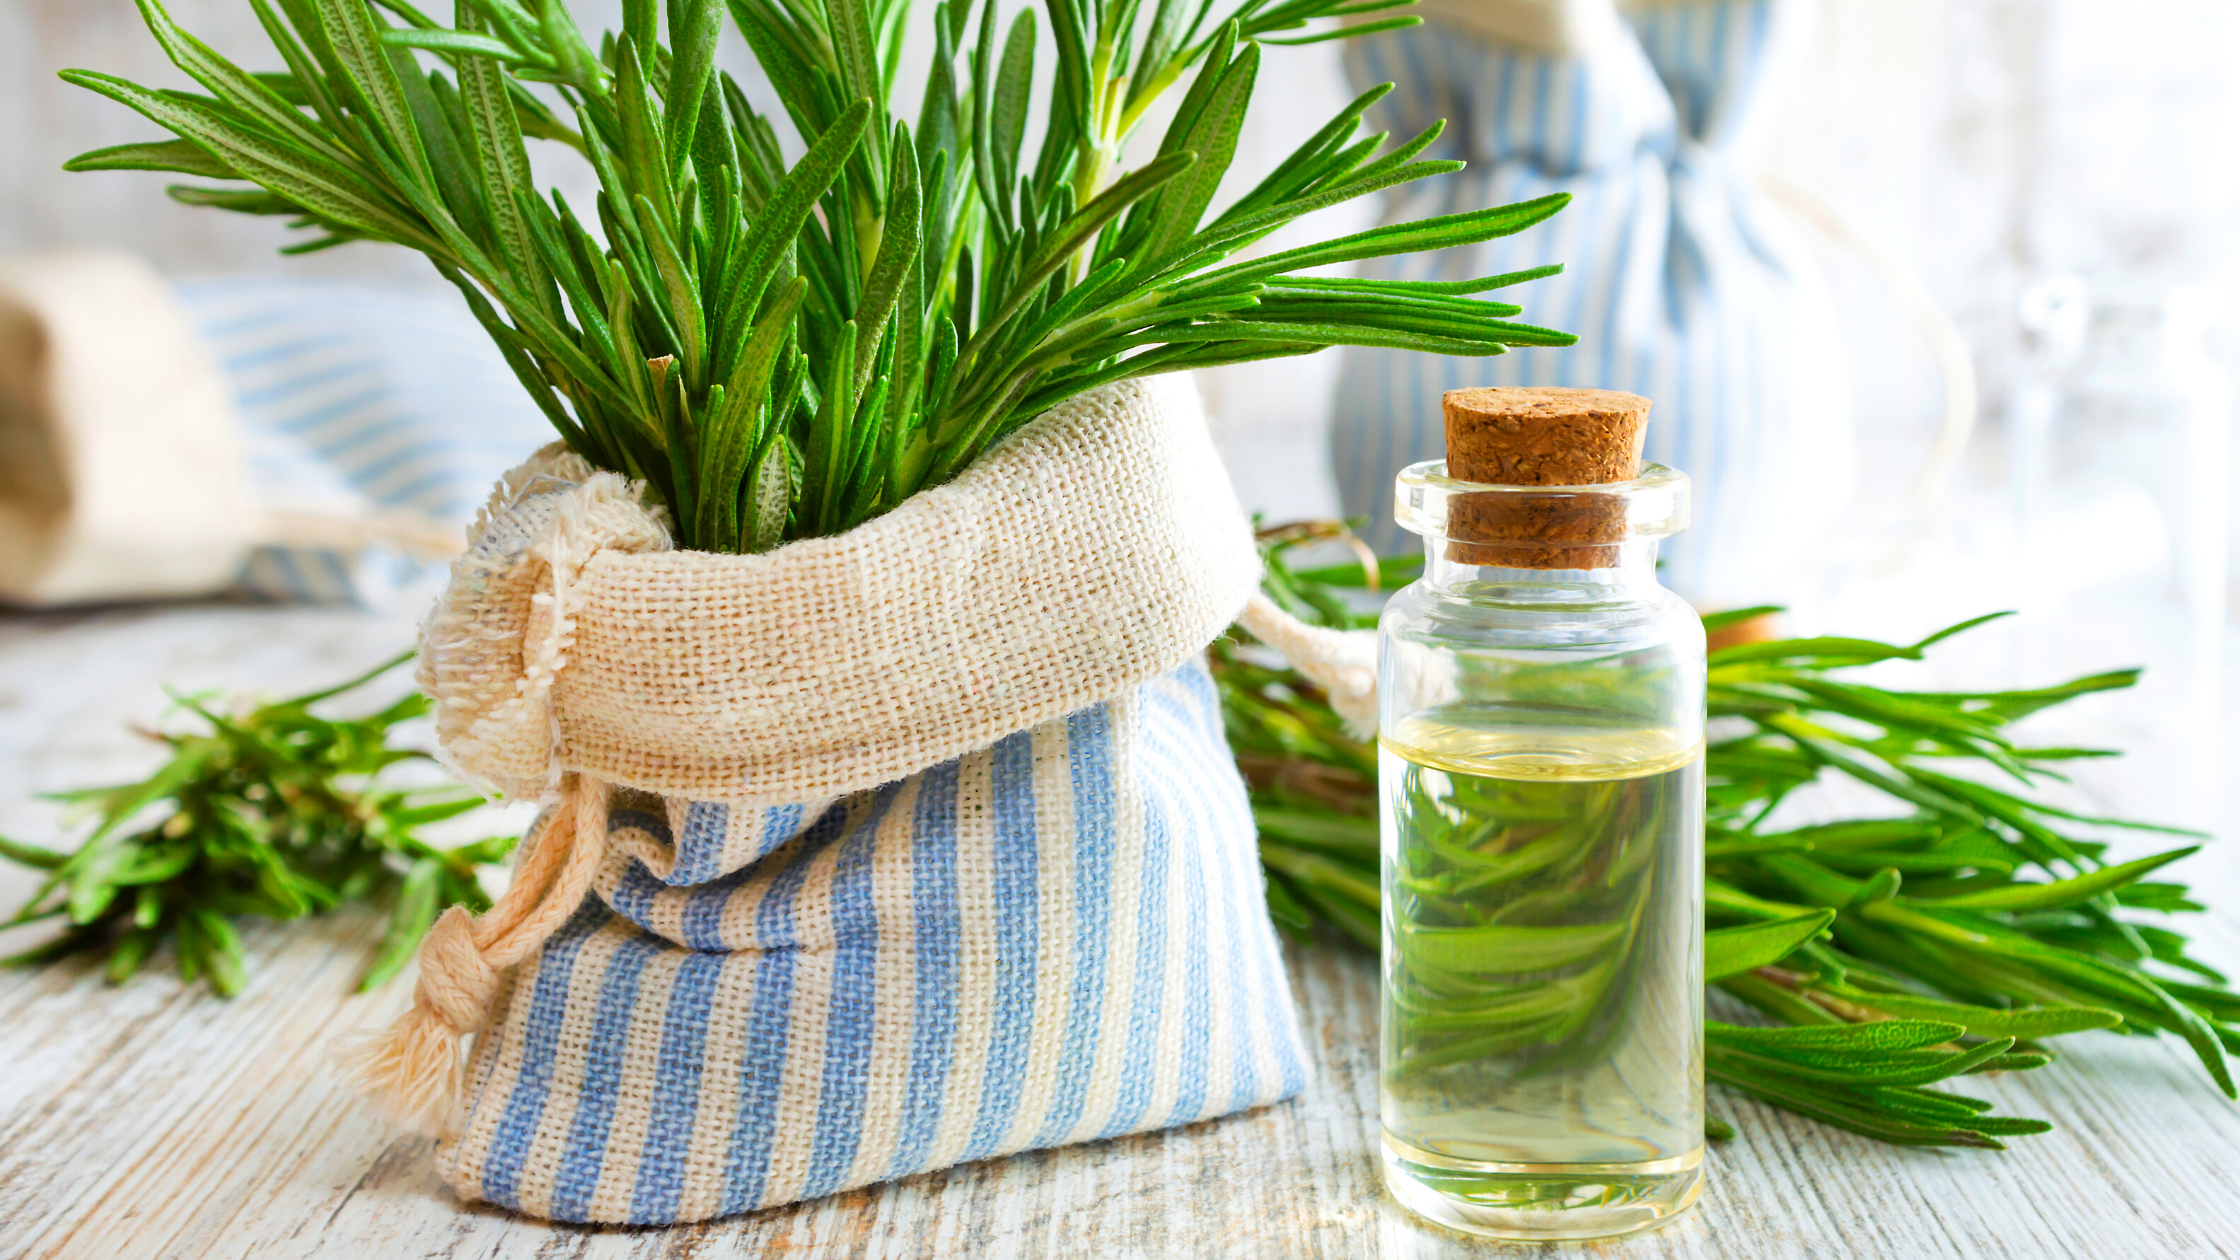 Rosemary Essential Oil Blend for Inflammation, Anxiety, & Stress